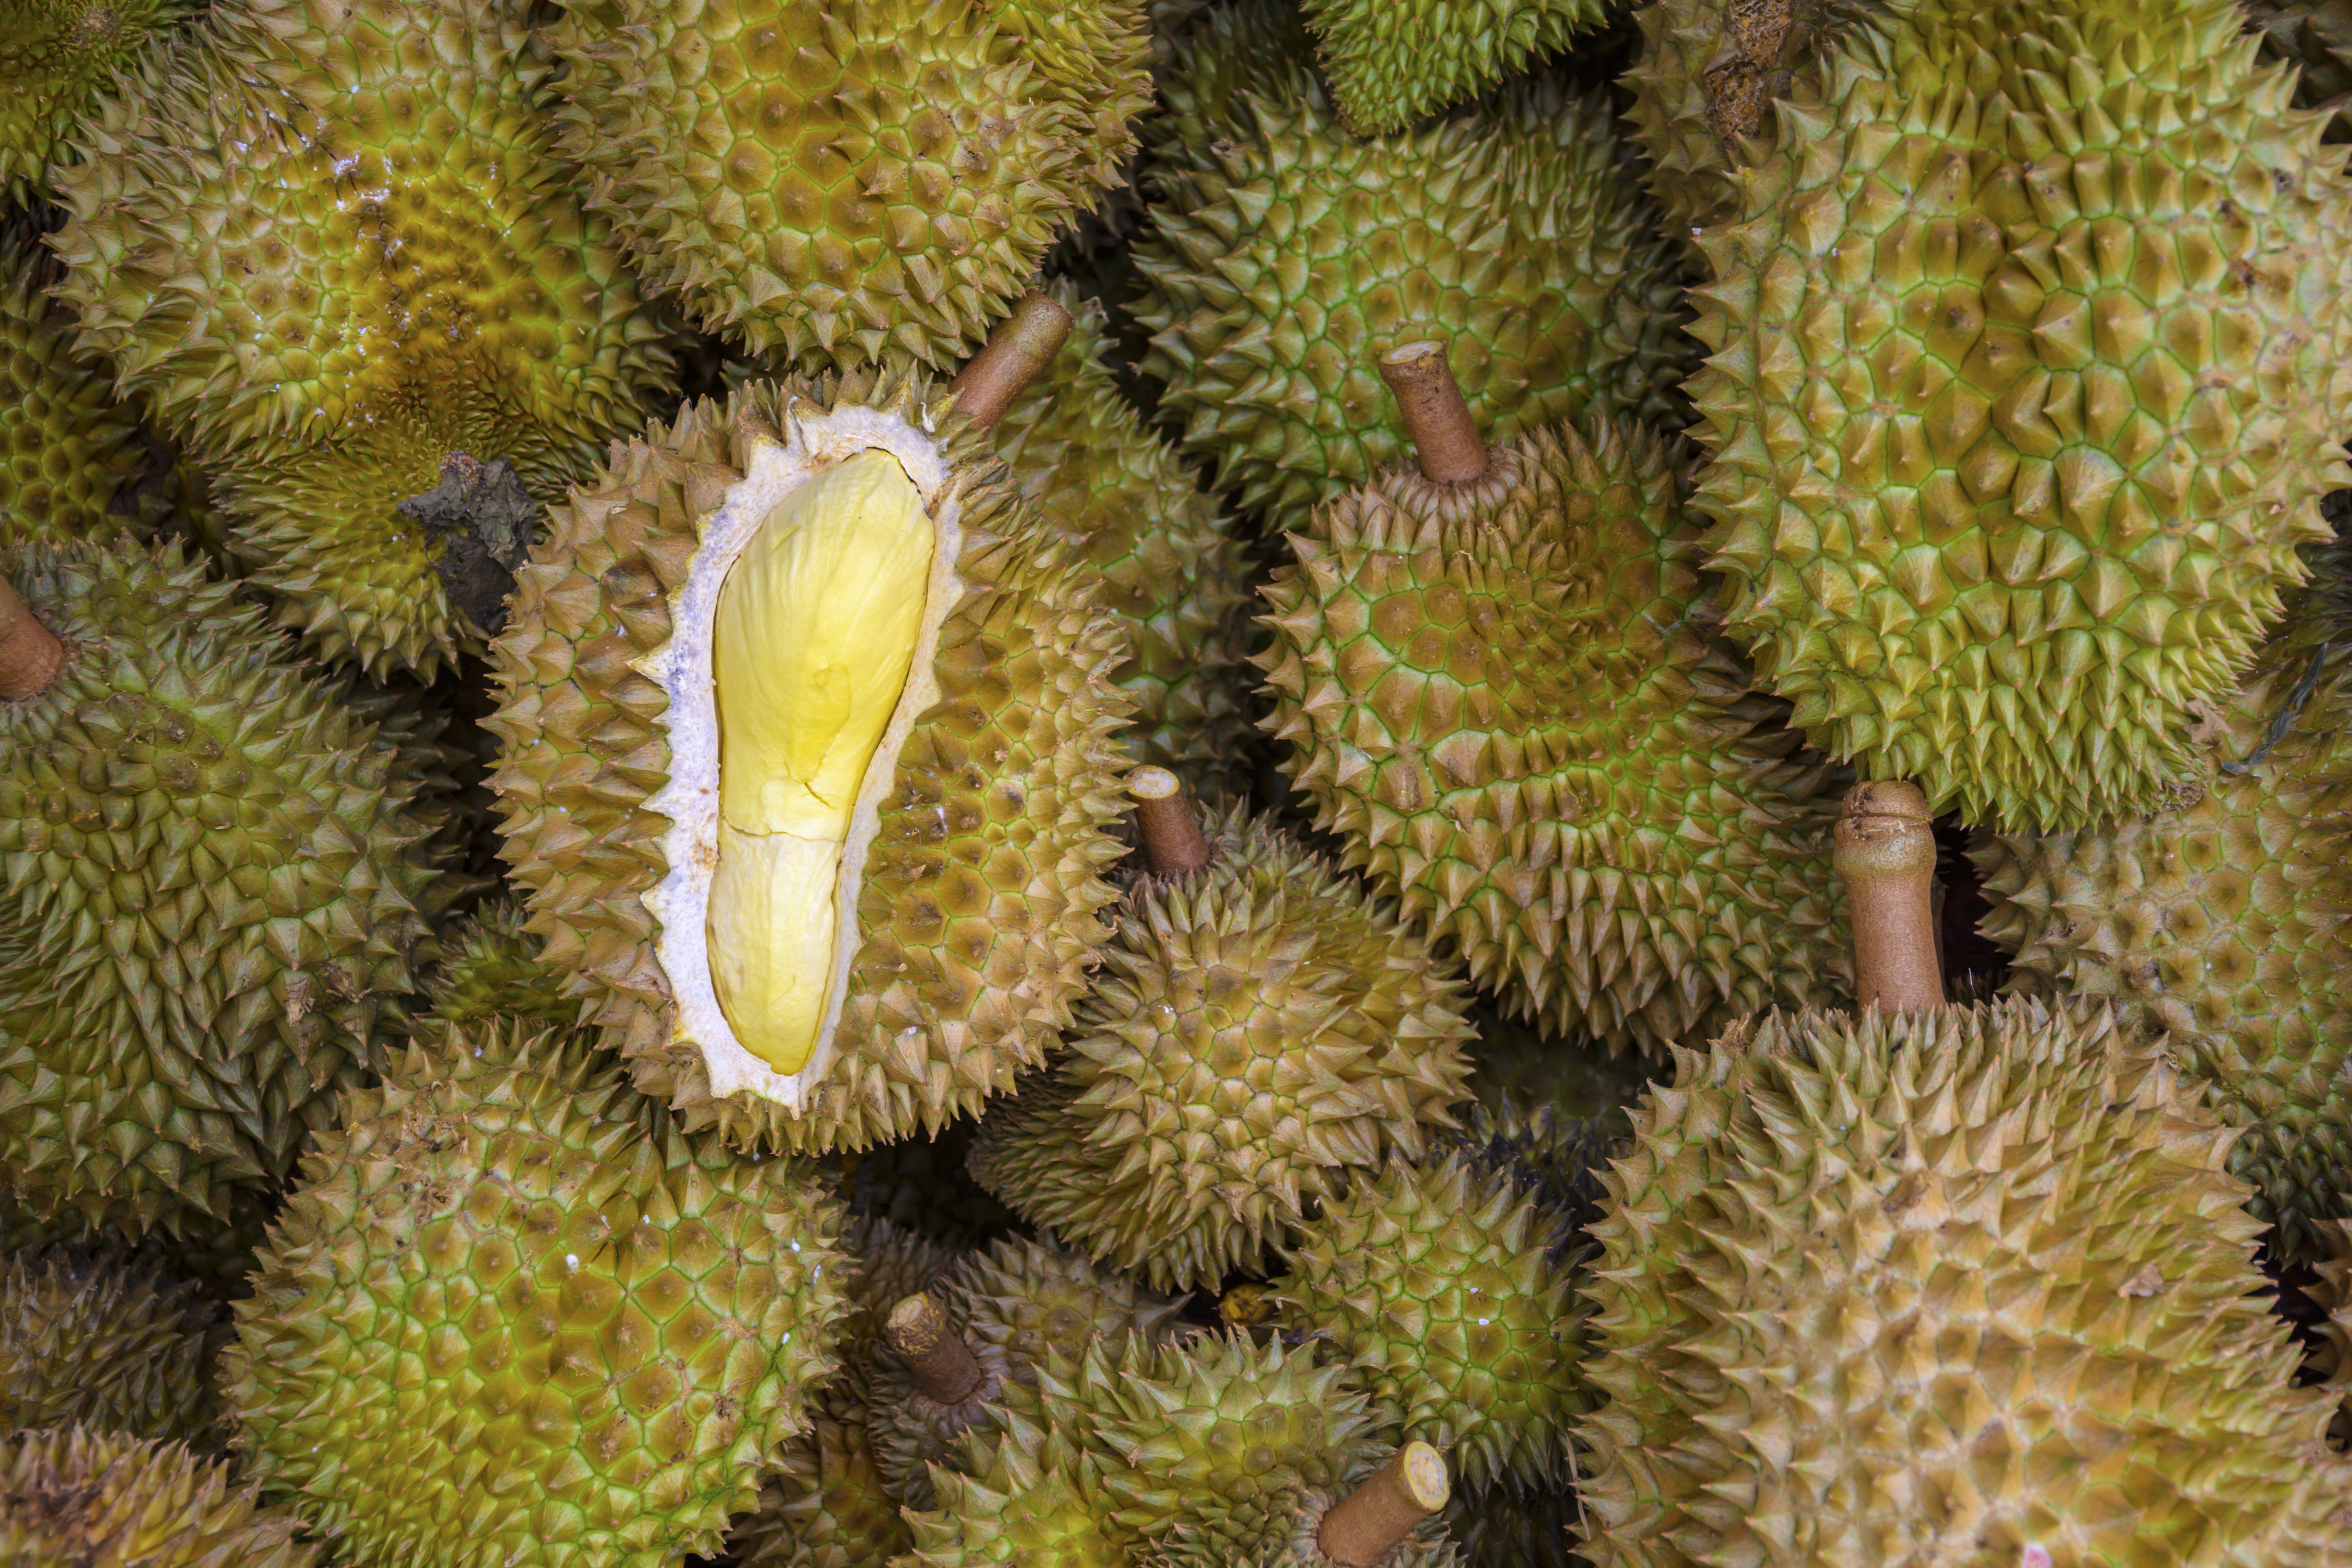 The Philippines will send more durian to China as part of a new deal involving the tropical fruit trade. Photo: Shutterstock